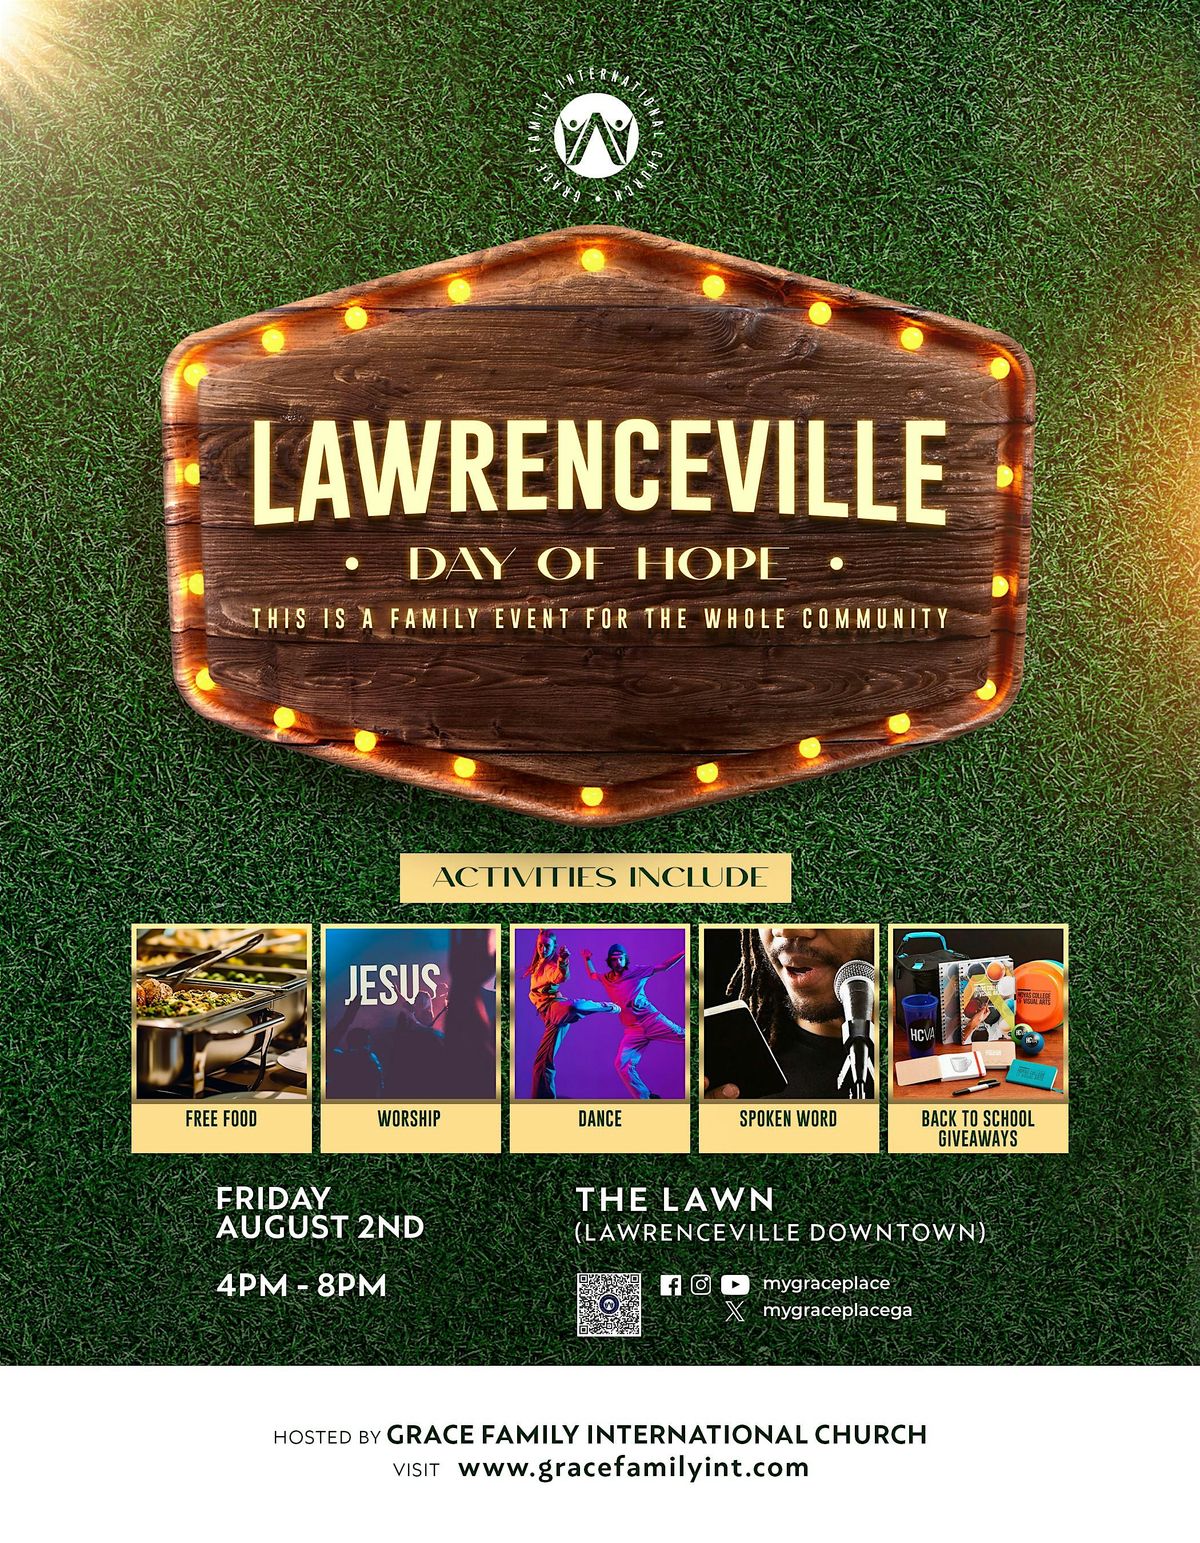 Lawrenceville Day of Hope